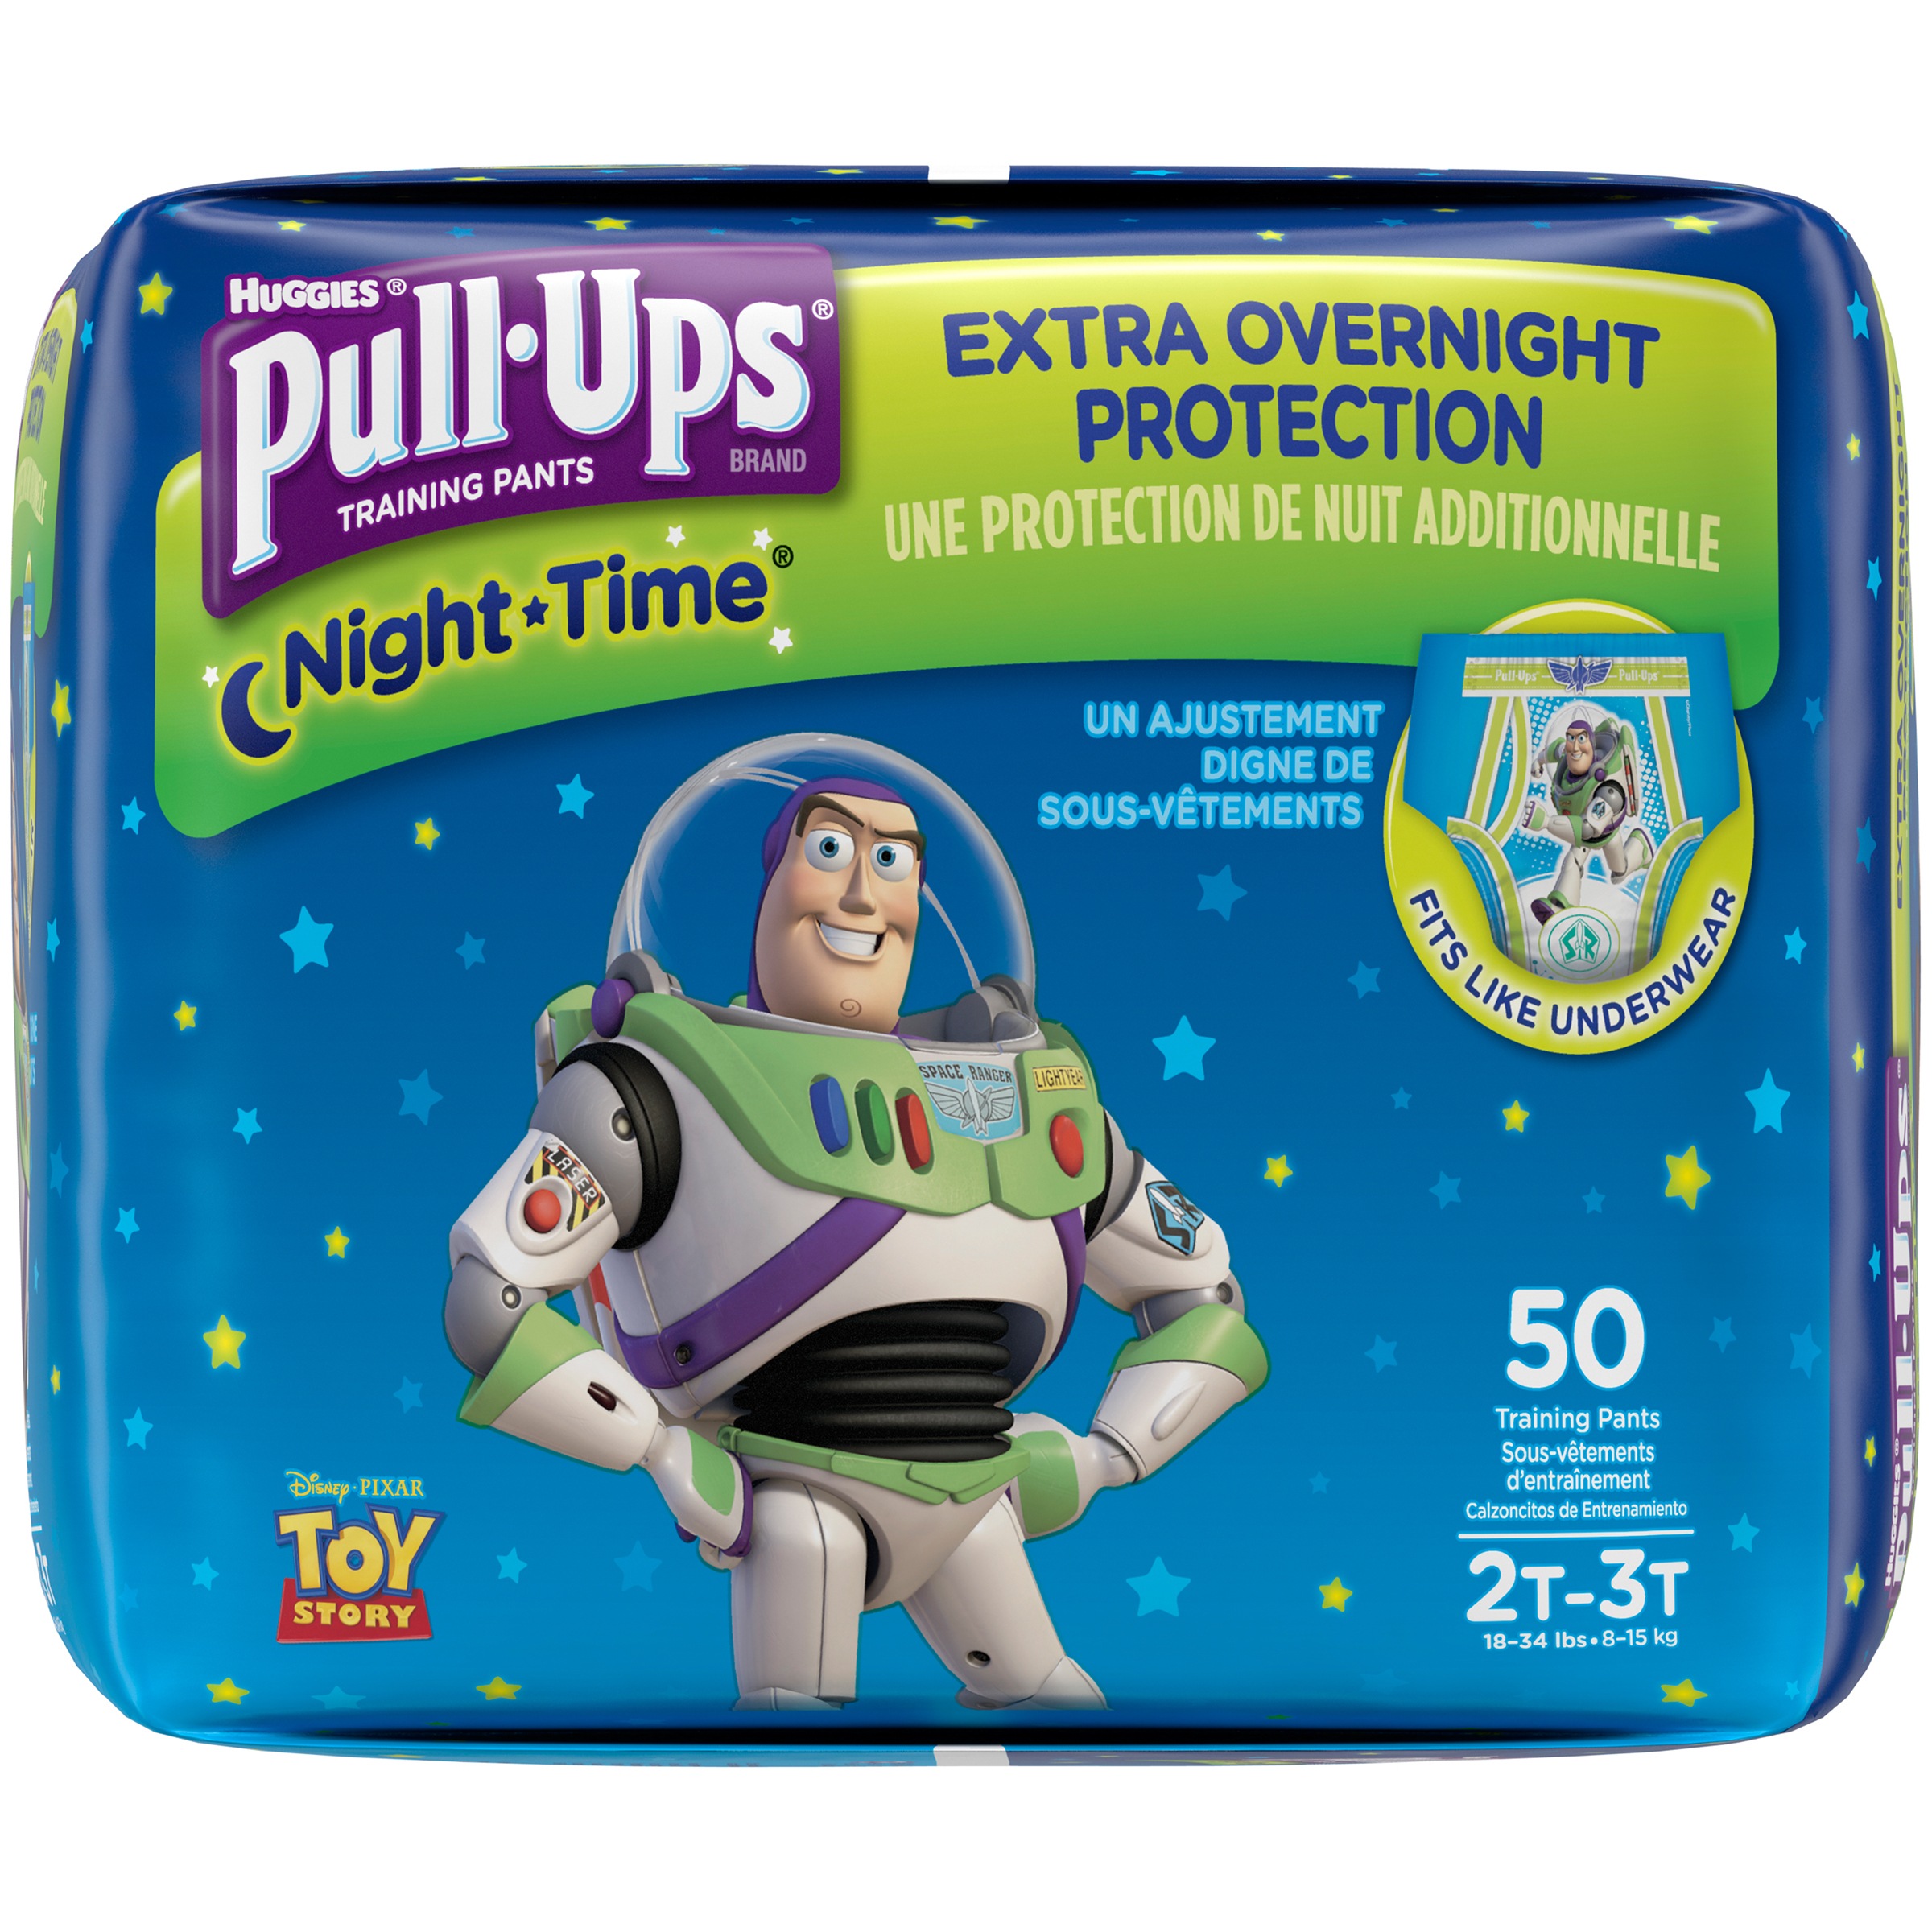 Pull-Ups Training Pants, NightTime for Boys 2T-3T - image 5 of 9